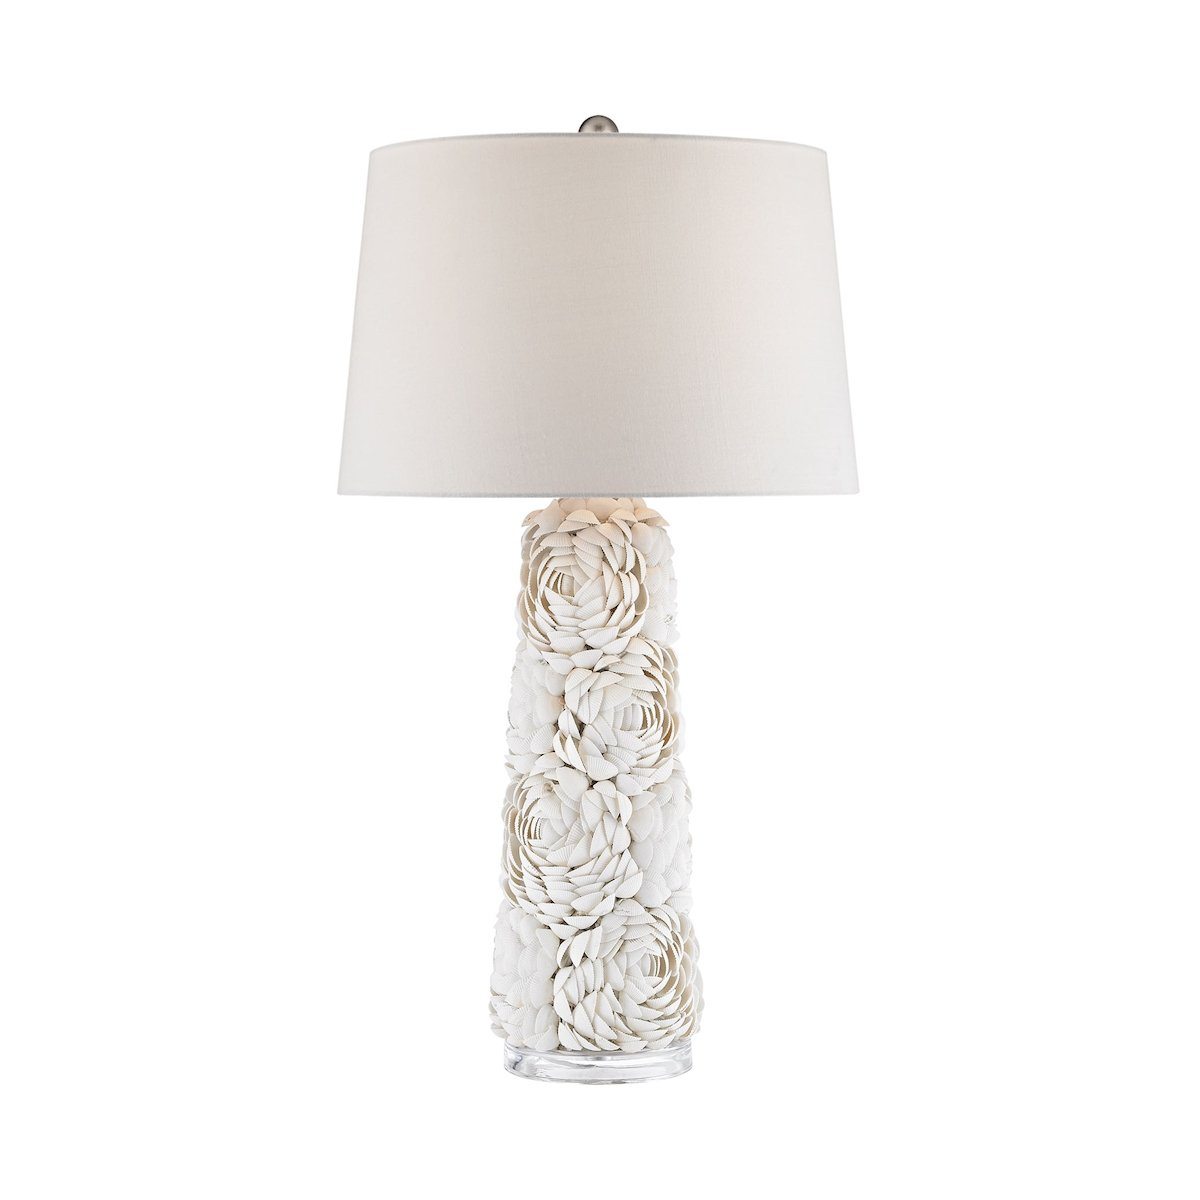 Windley Table Lamp Lamps Dimond Lighting 